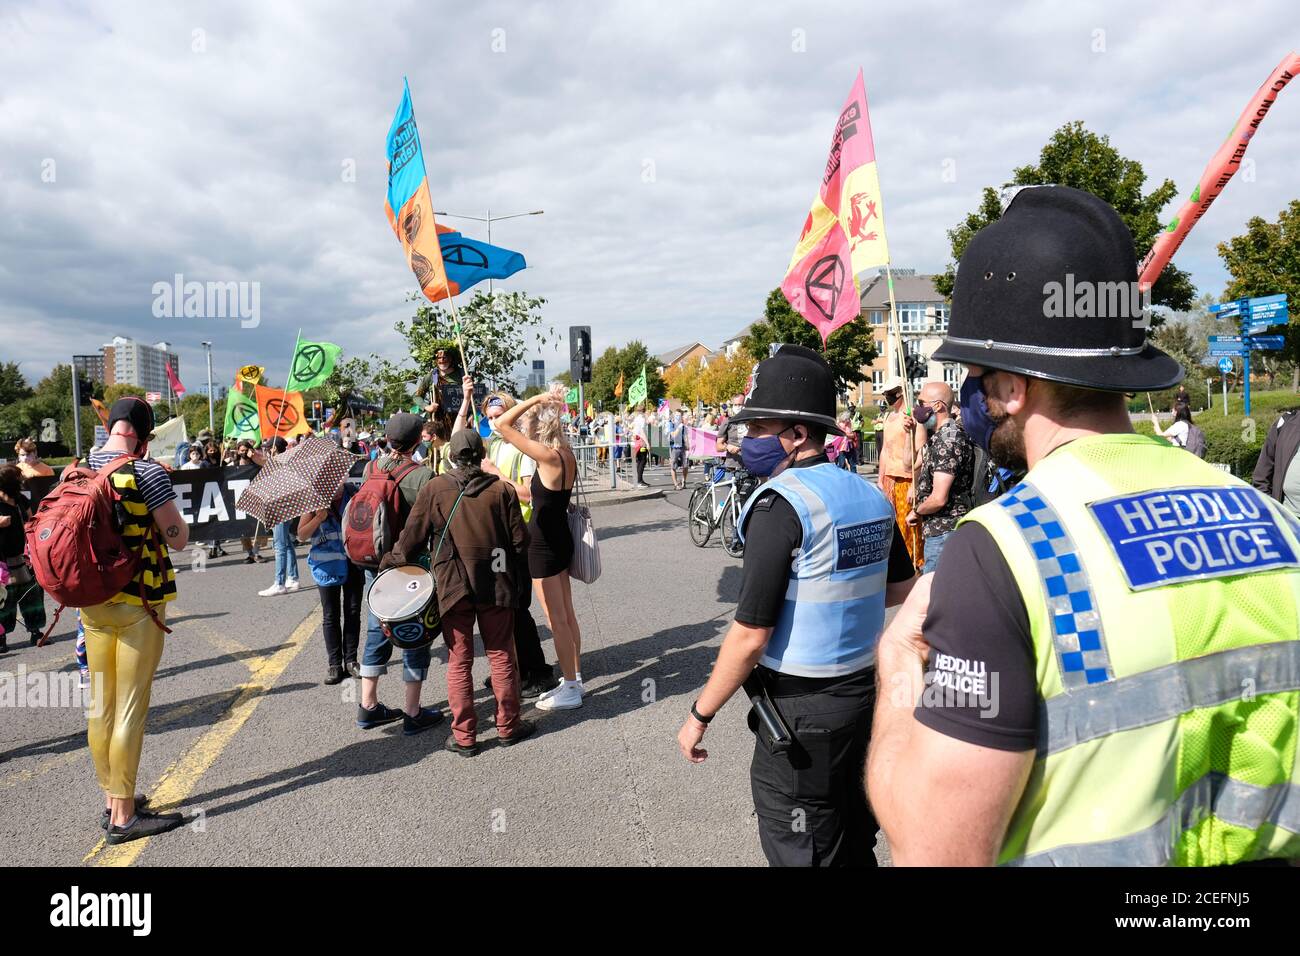 Cardiff, Wales, UK - Tuesday 1st September 2020 - Police officers monitor the Extinction Rebellion ( XR ) protesters as they march from central Cardiff down to Cardiff Bay protesting against climate change and the future of society. Photo Steven May / Alamy Live News Stock Photo